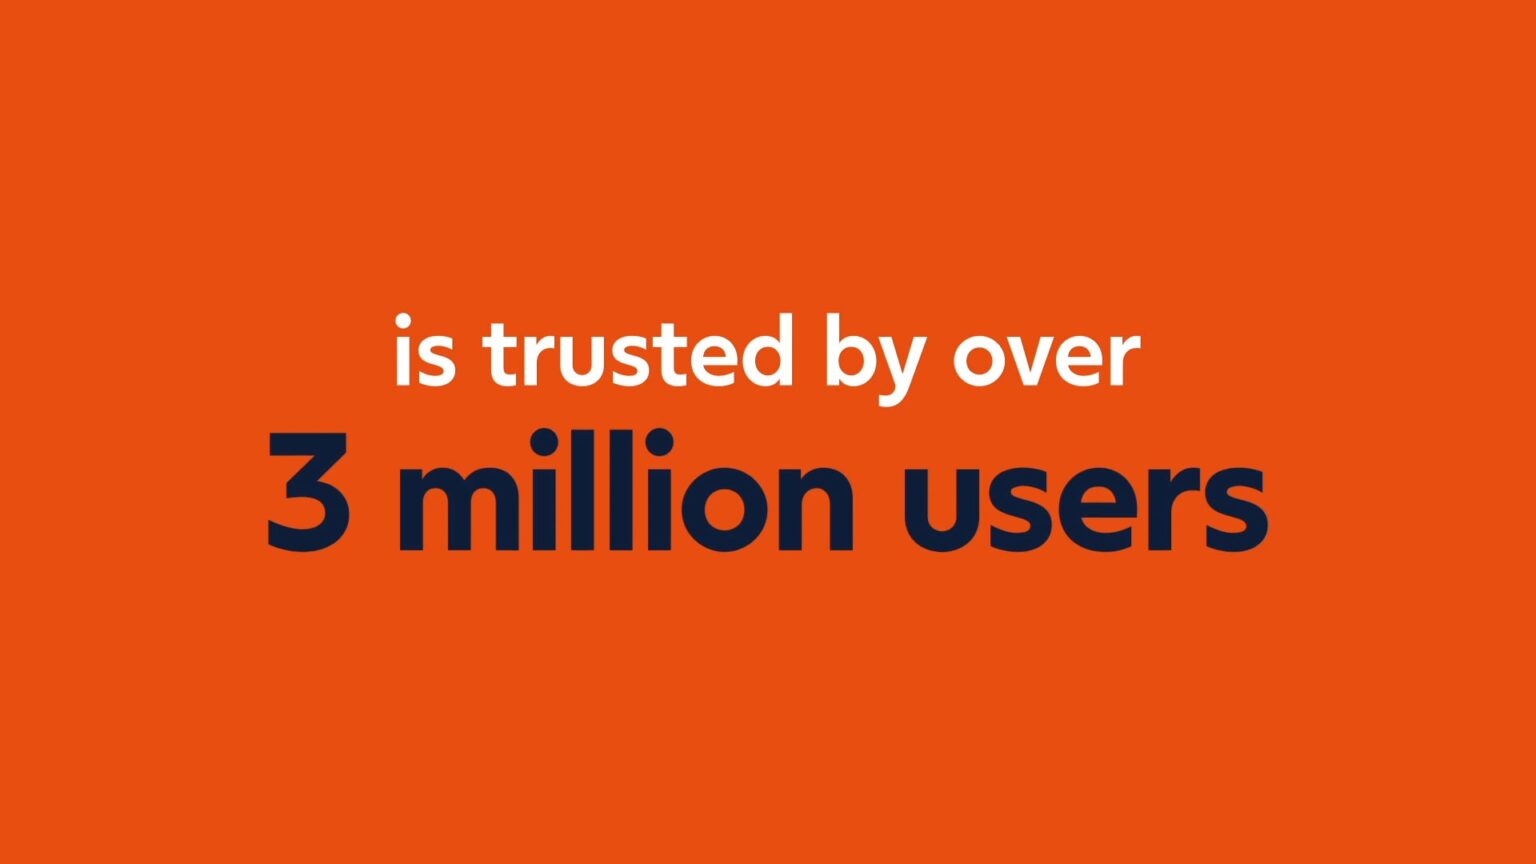 The words "is trusted by over 3 million useres" on an orange background.